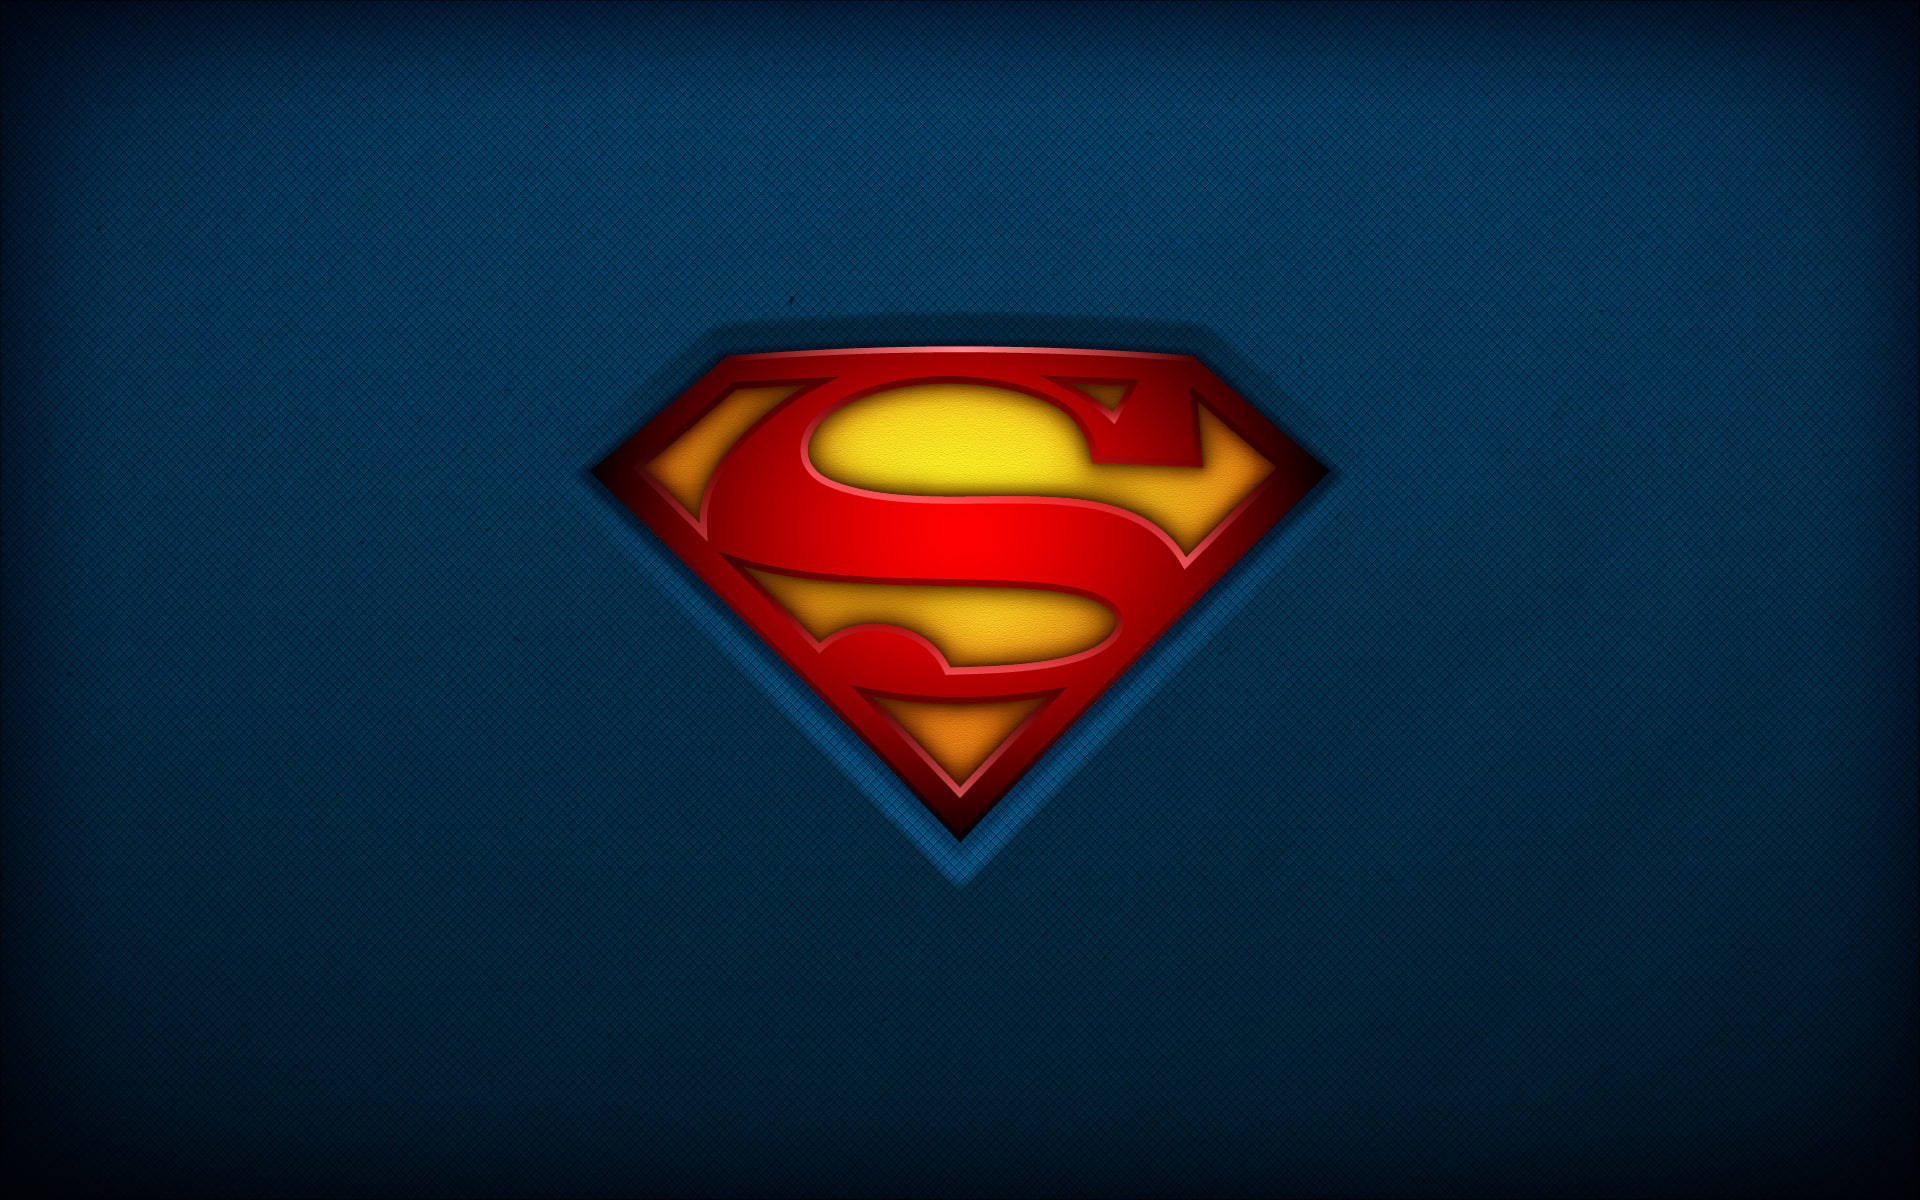 Iconic Full-Color Superman Logo in High Resolution Wallpaper